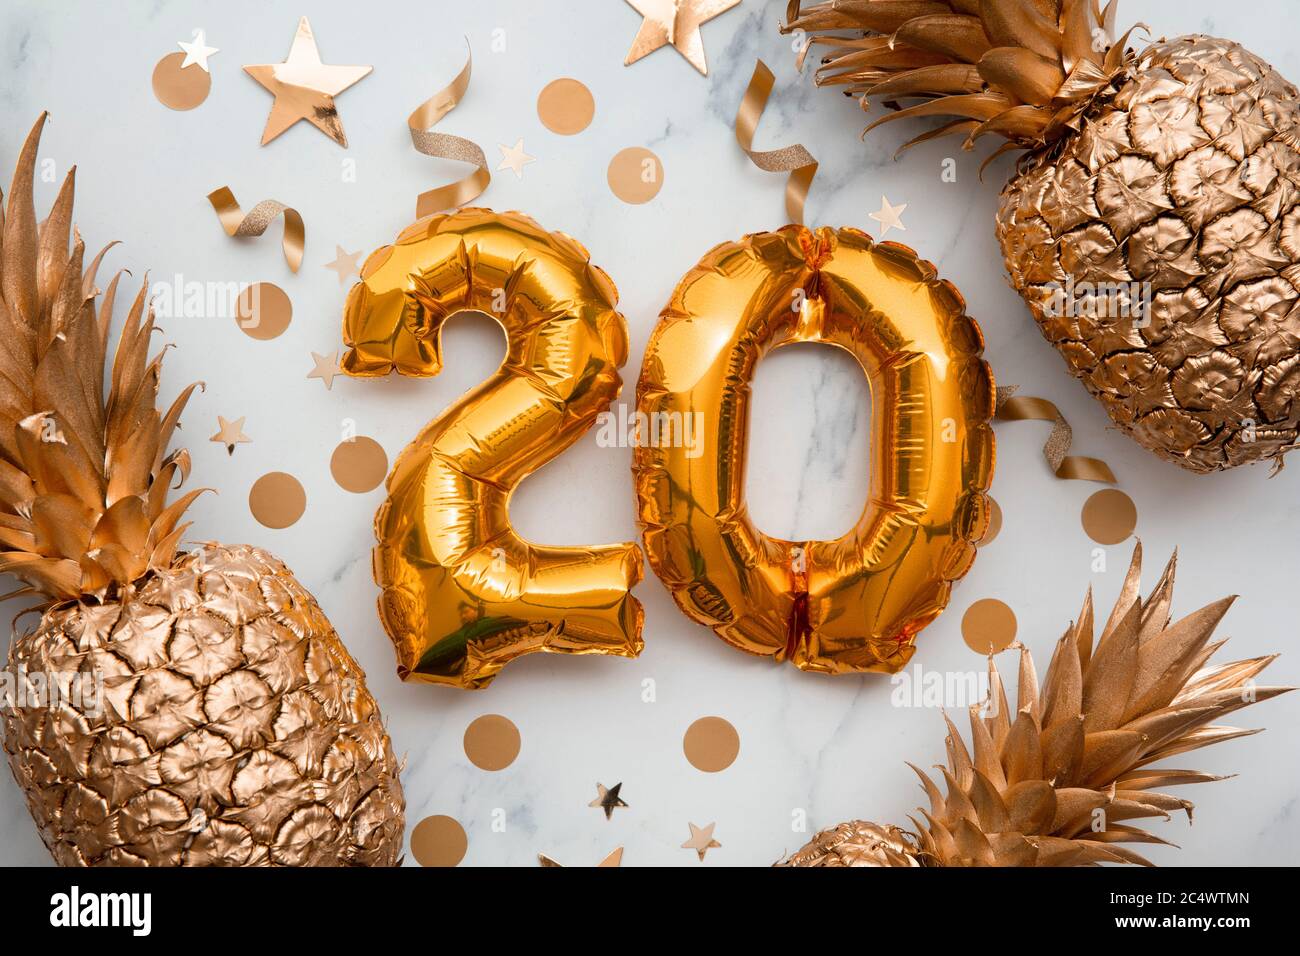 20th birthday celebration card with gold foil balloons and golden pineapples Stock Photo